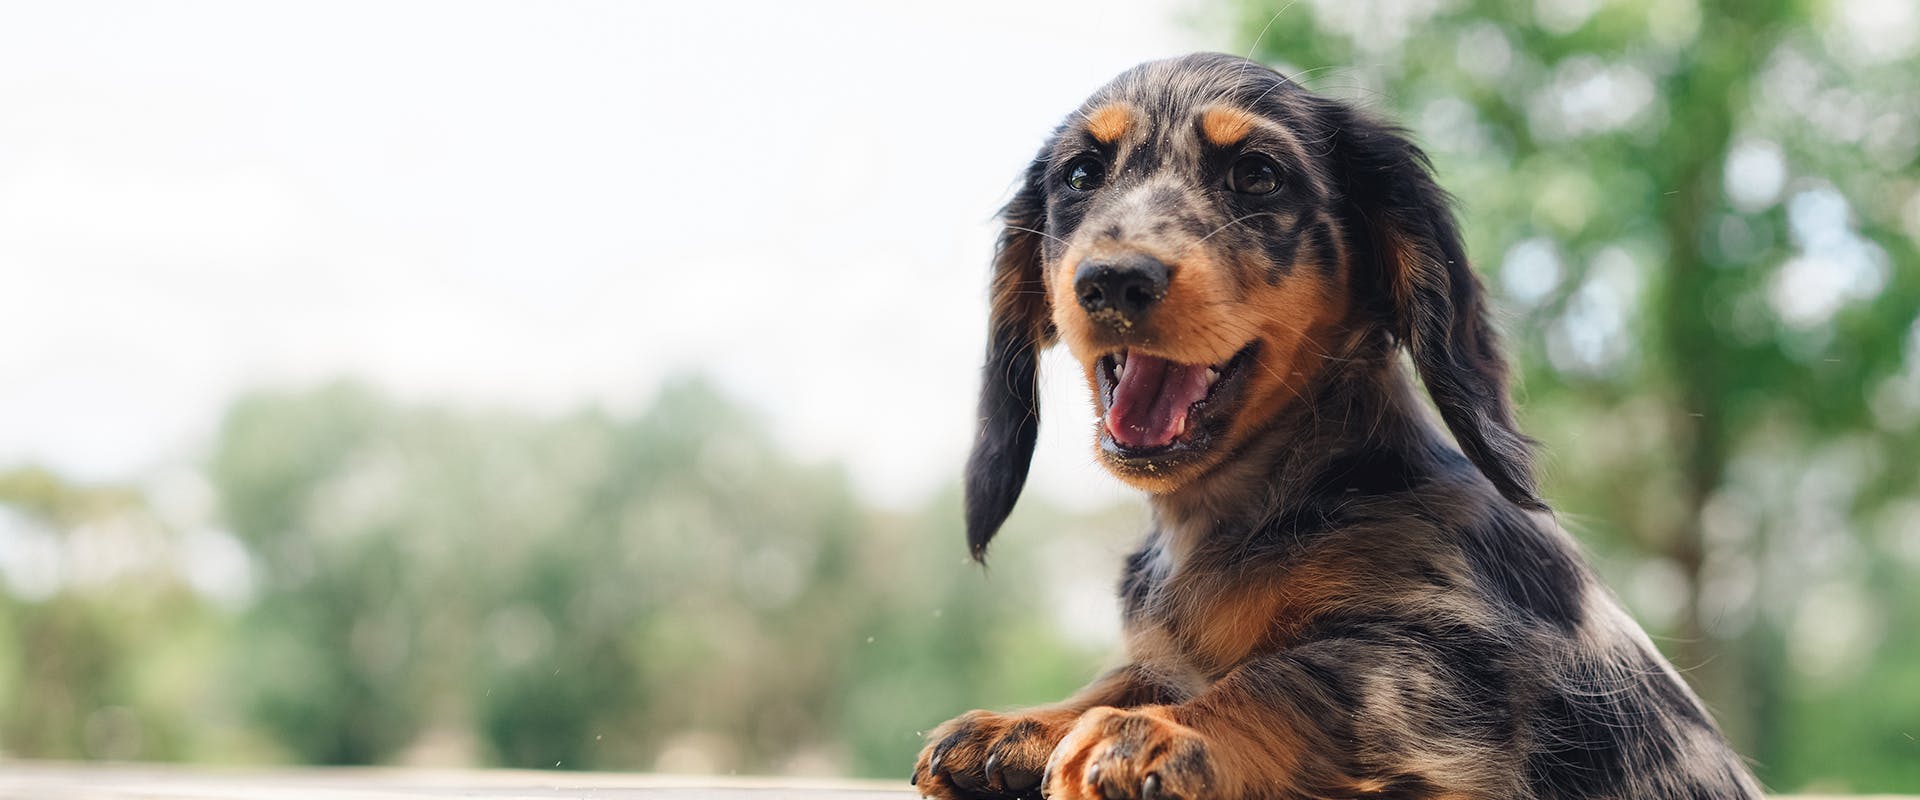 A happy looking Dachshund puppy standing outdoors, his paws resting on a bench table